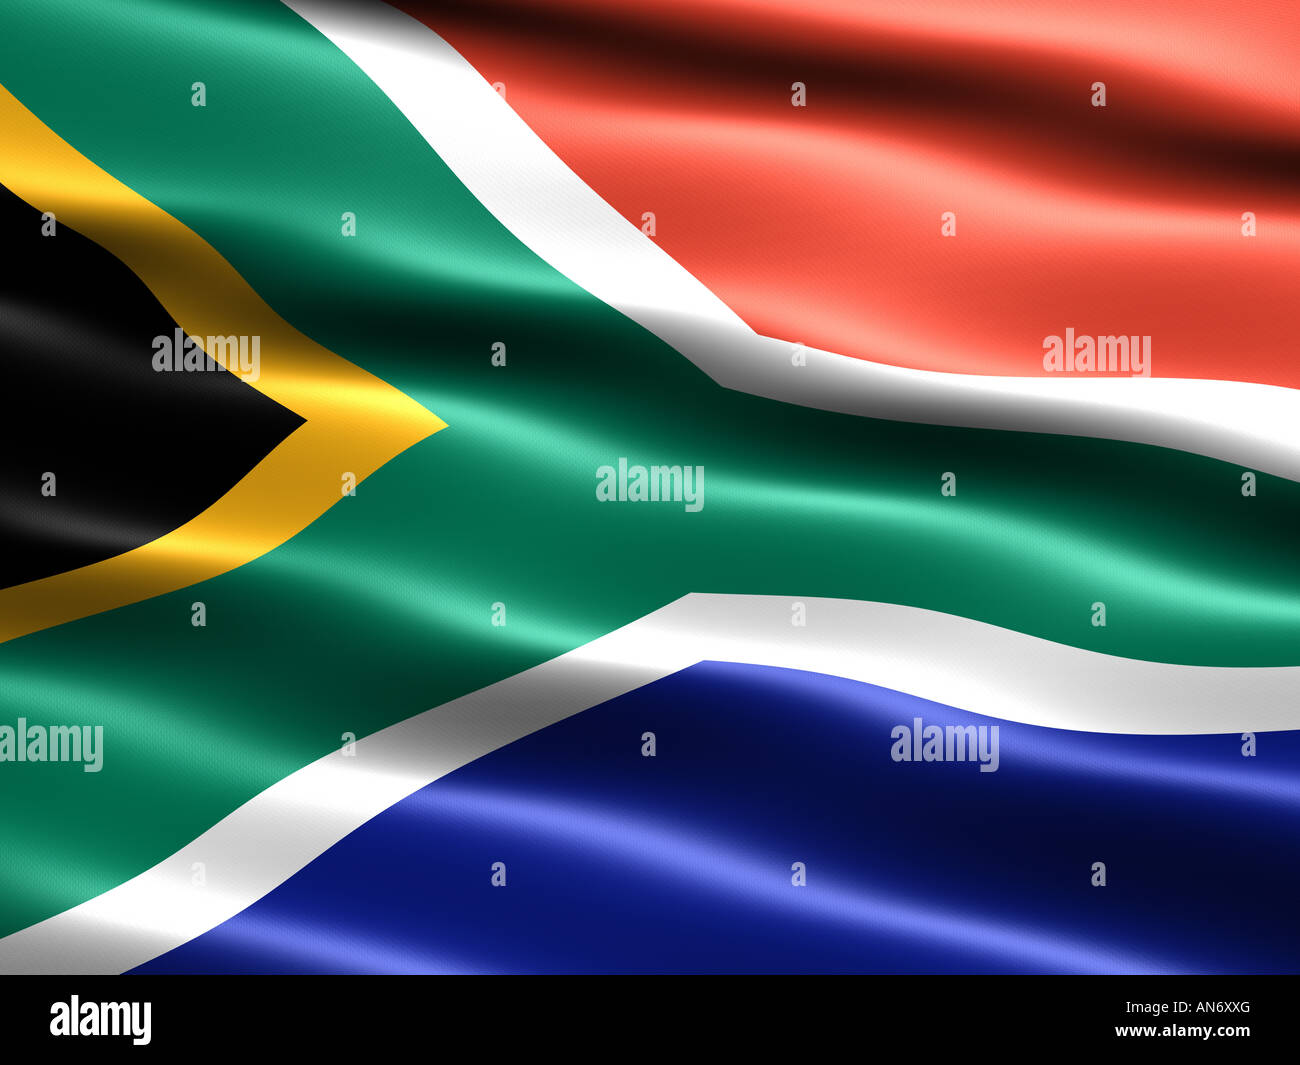 Flag of South Africa computer generated illustration with silky appearance and waves Stock Photo